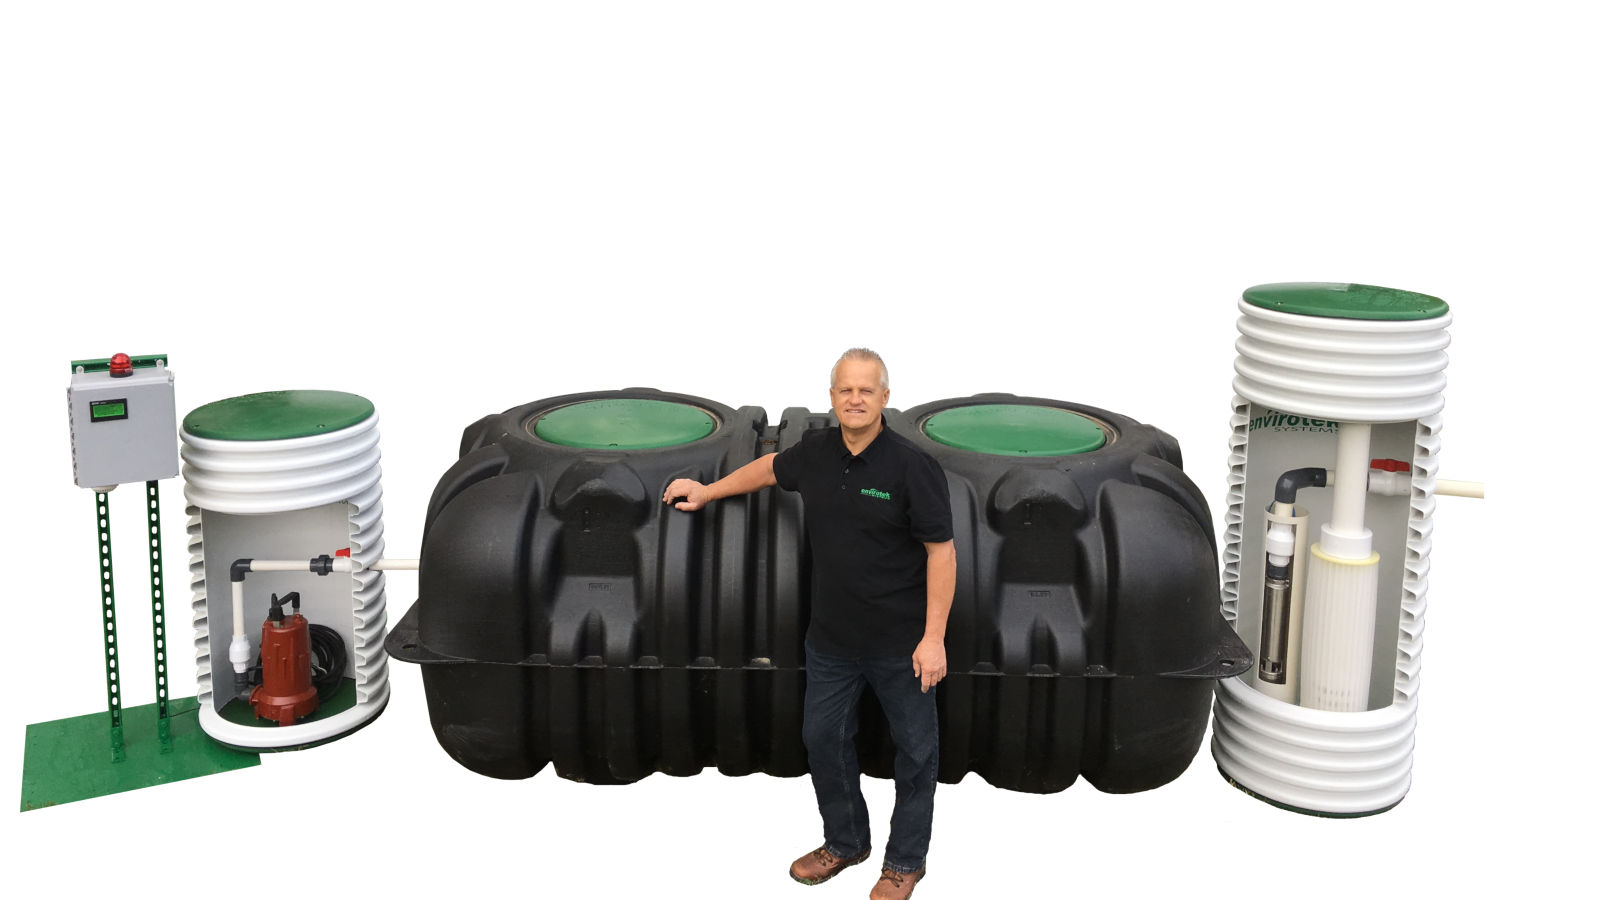 Nixa Envirotek Systems owner Jon Hancock with septic system components and pumps